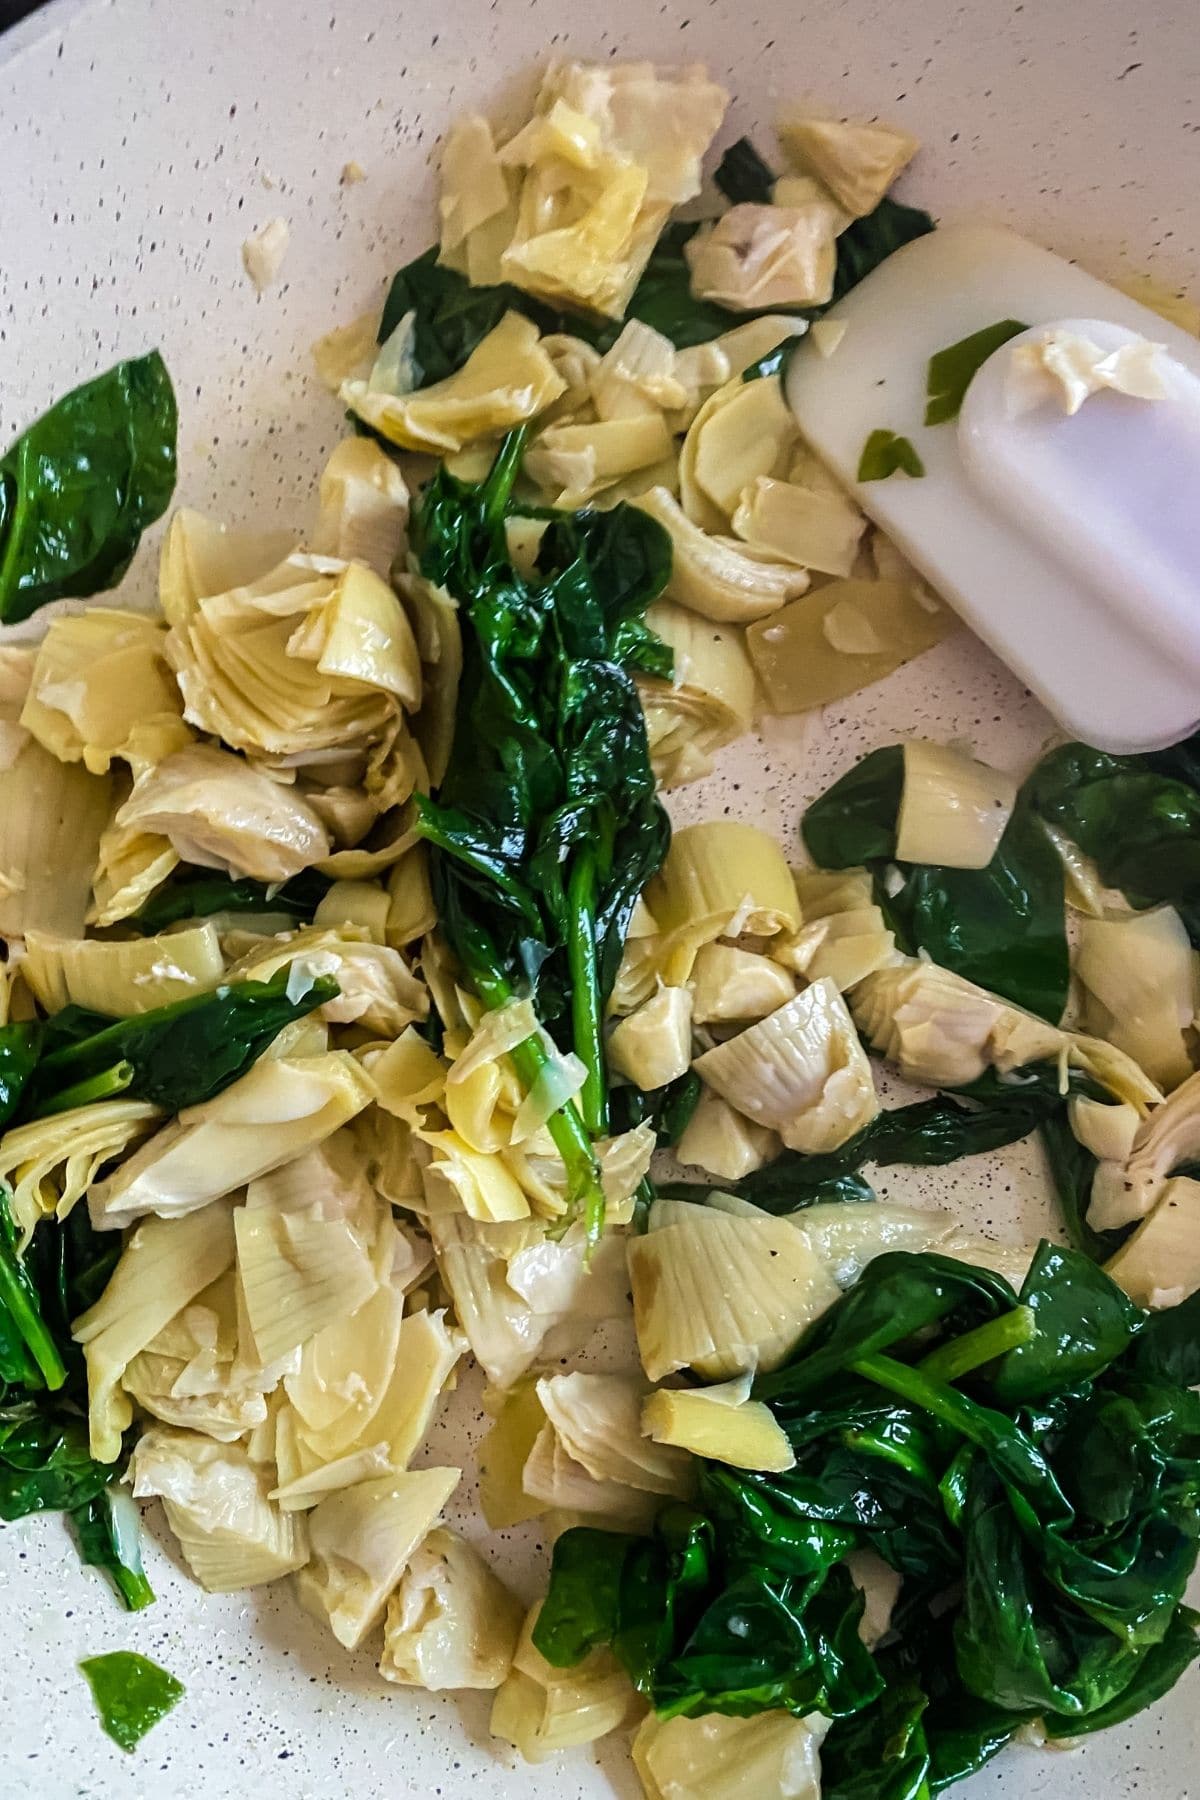 Spinach with artichoke hearts in skillet with white spatula